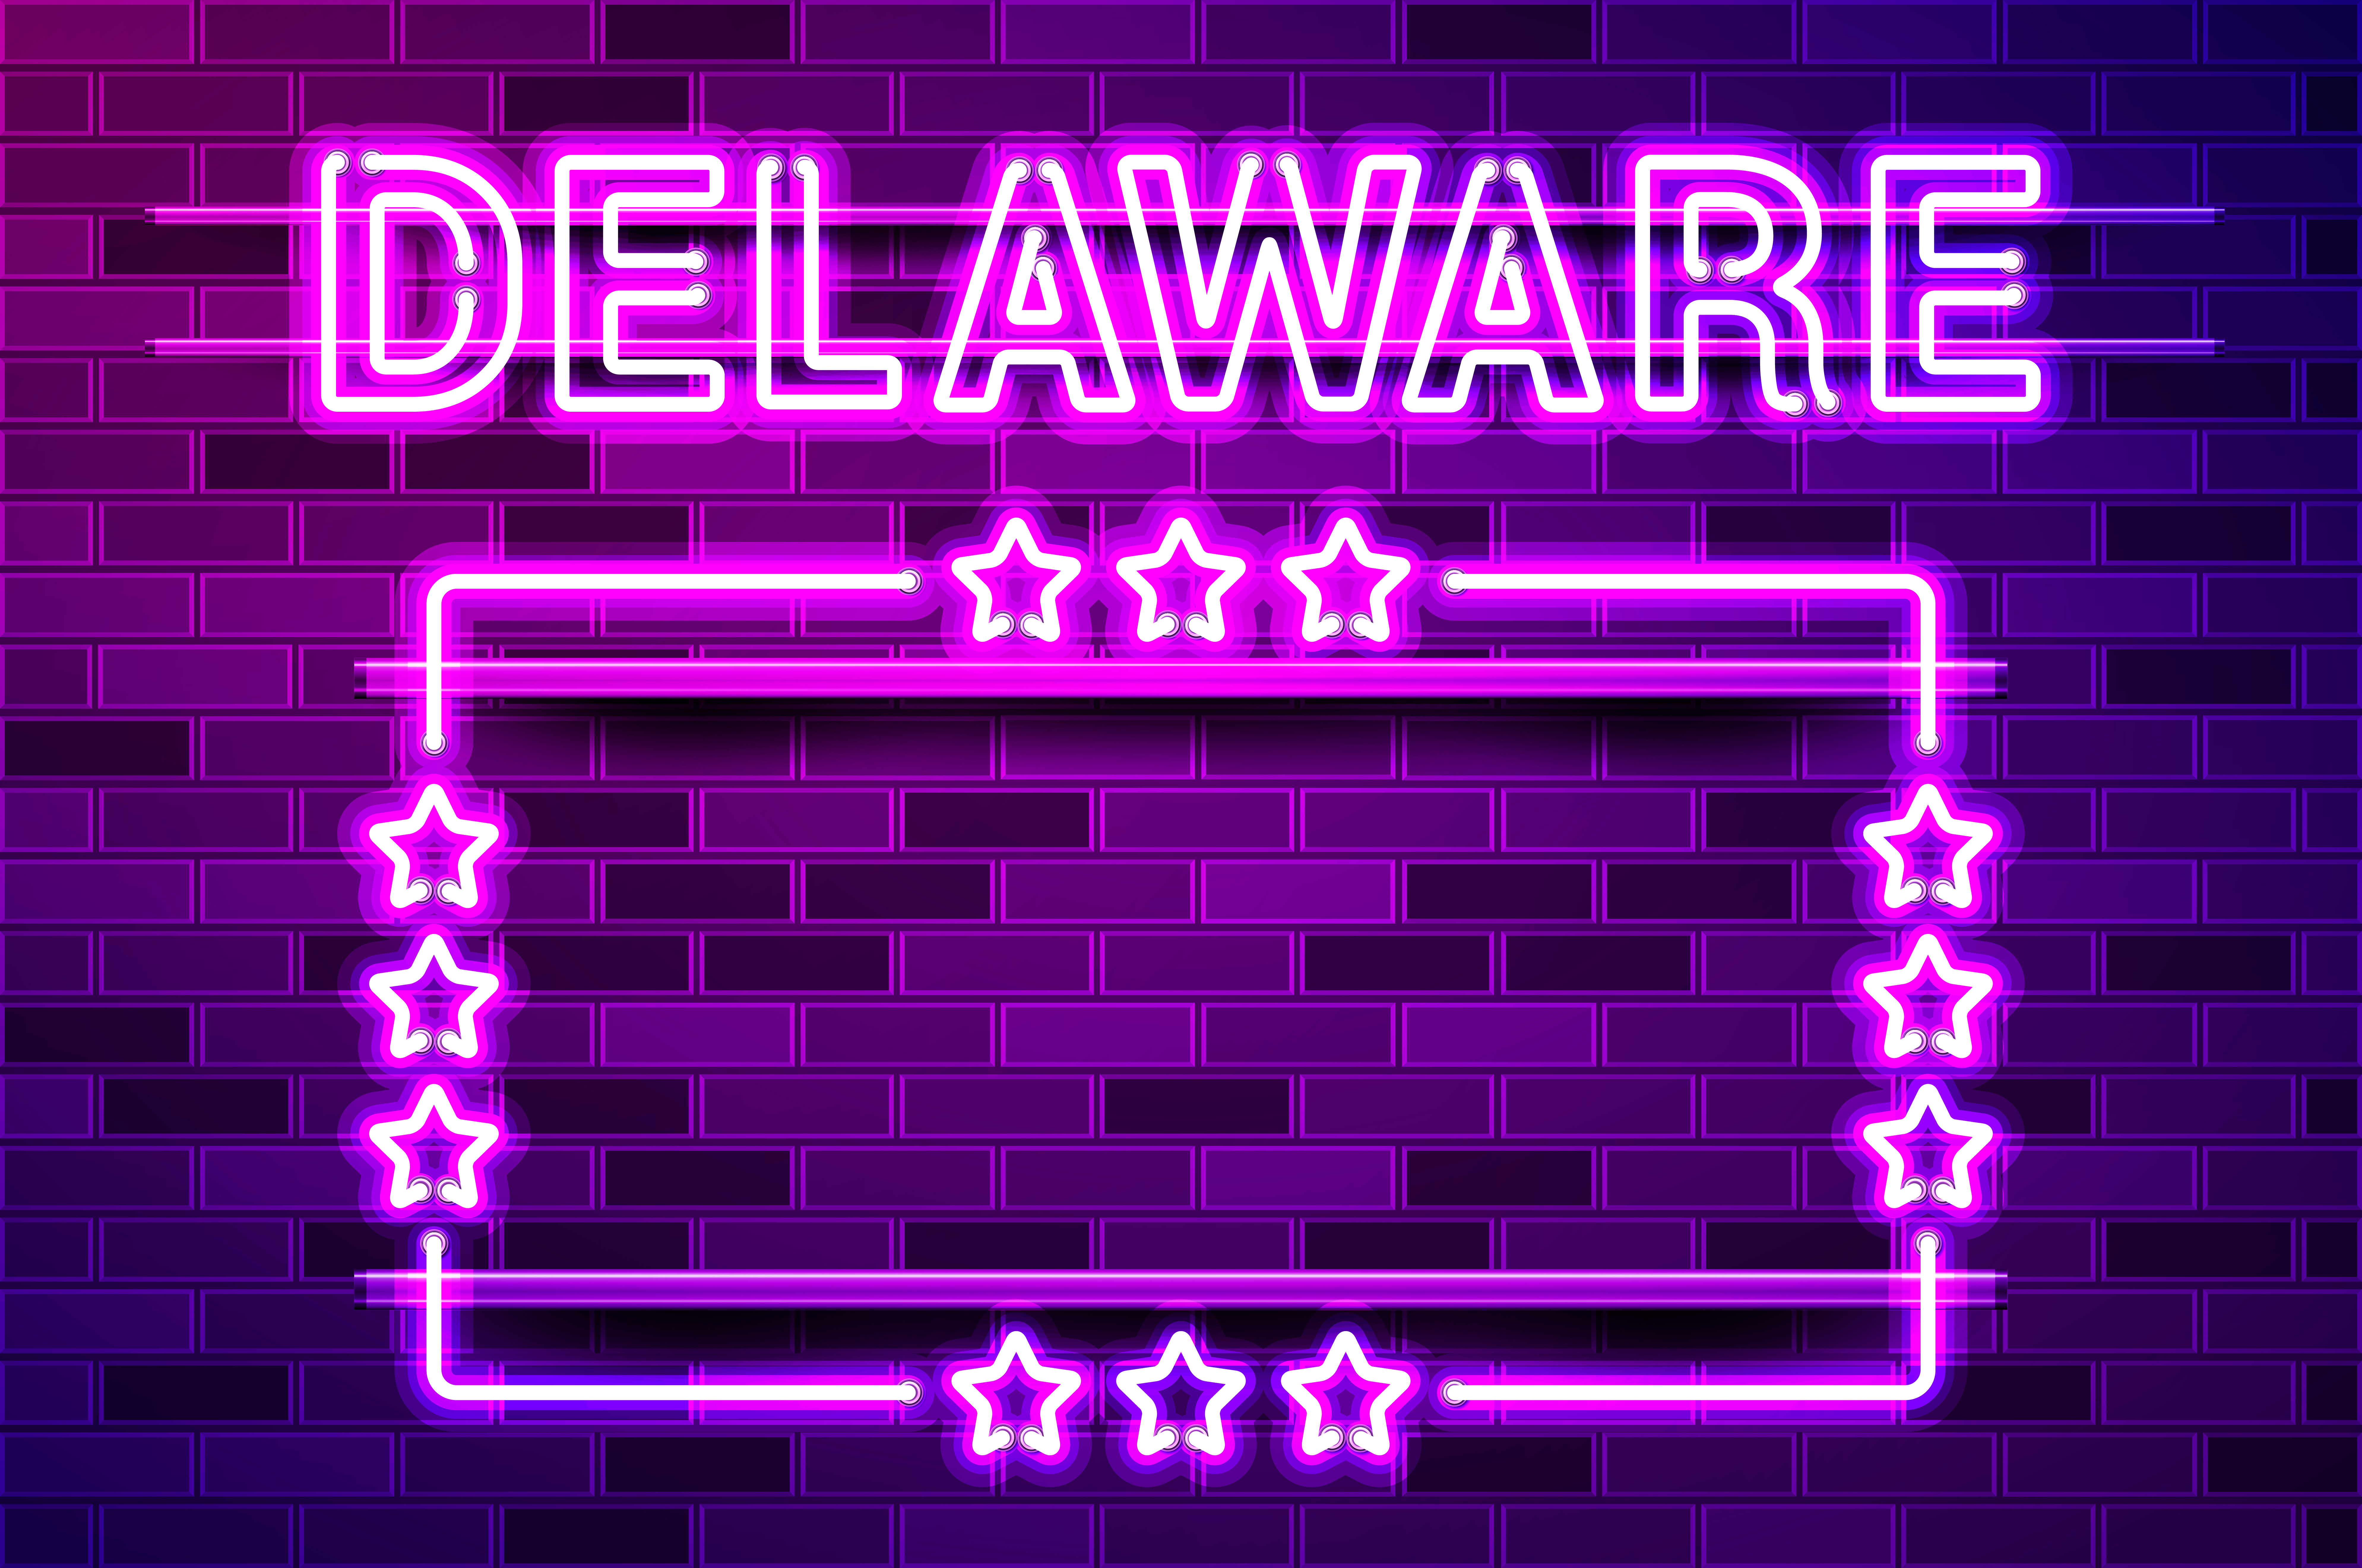 Delaware US State glowing purple neon lettering and a rectangular frame with stars. Realistic vector illustration. Purple brick wall, violet glow, metal holders.. Delaware US State glowing purple neon lettering and a rectangular frame with stars